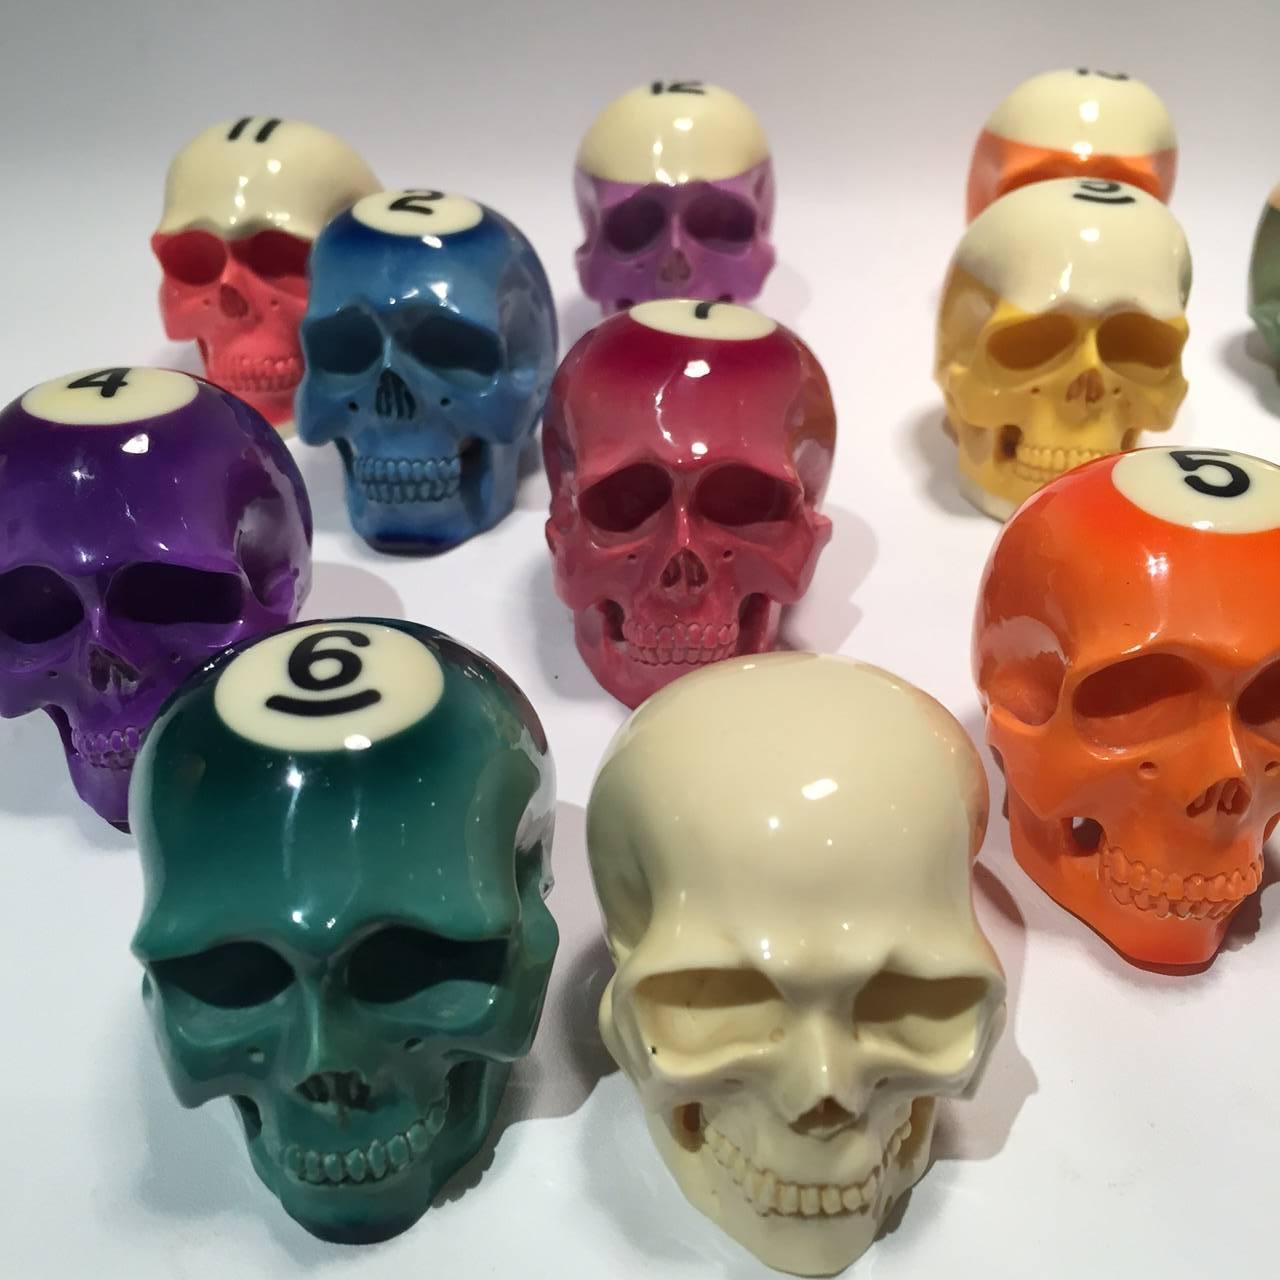 Billiard ball skull set, carved in Indonesia. This is a complete set of vintage Bakelite pool balls, including the cue ball, that have been recently hand-carved in the shape of skulls. A great gift for any billiard enthusiast.